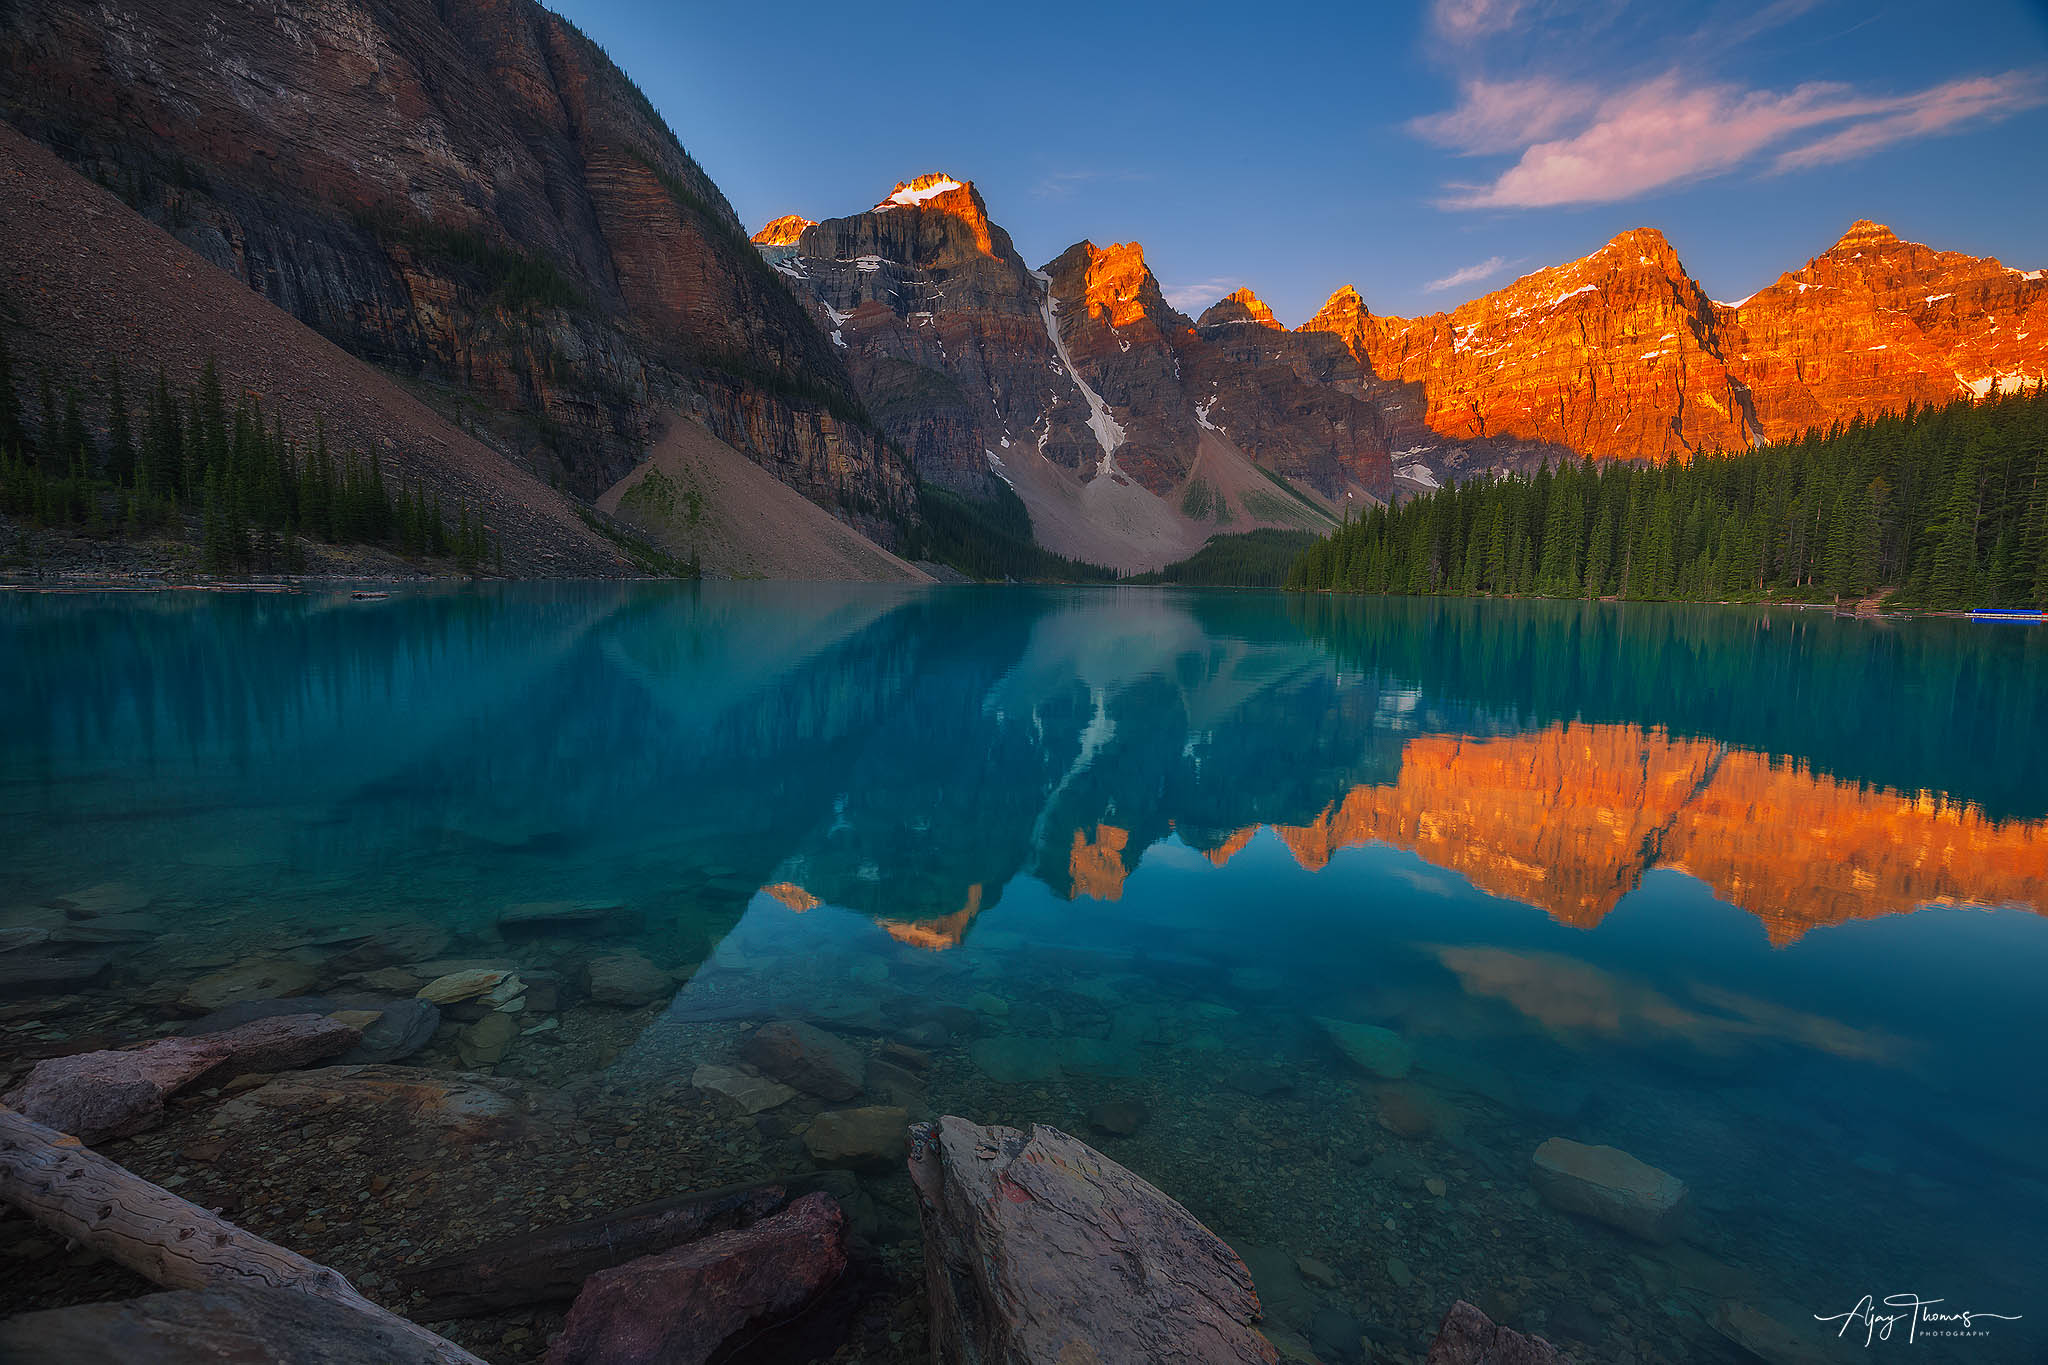 Moraine Lake, located in Banff National Park, Alberta, is without a doubt one of Canada's most frequently photographed sites...